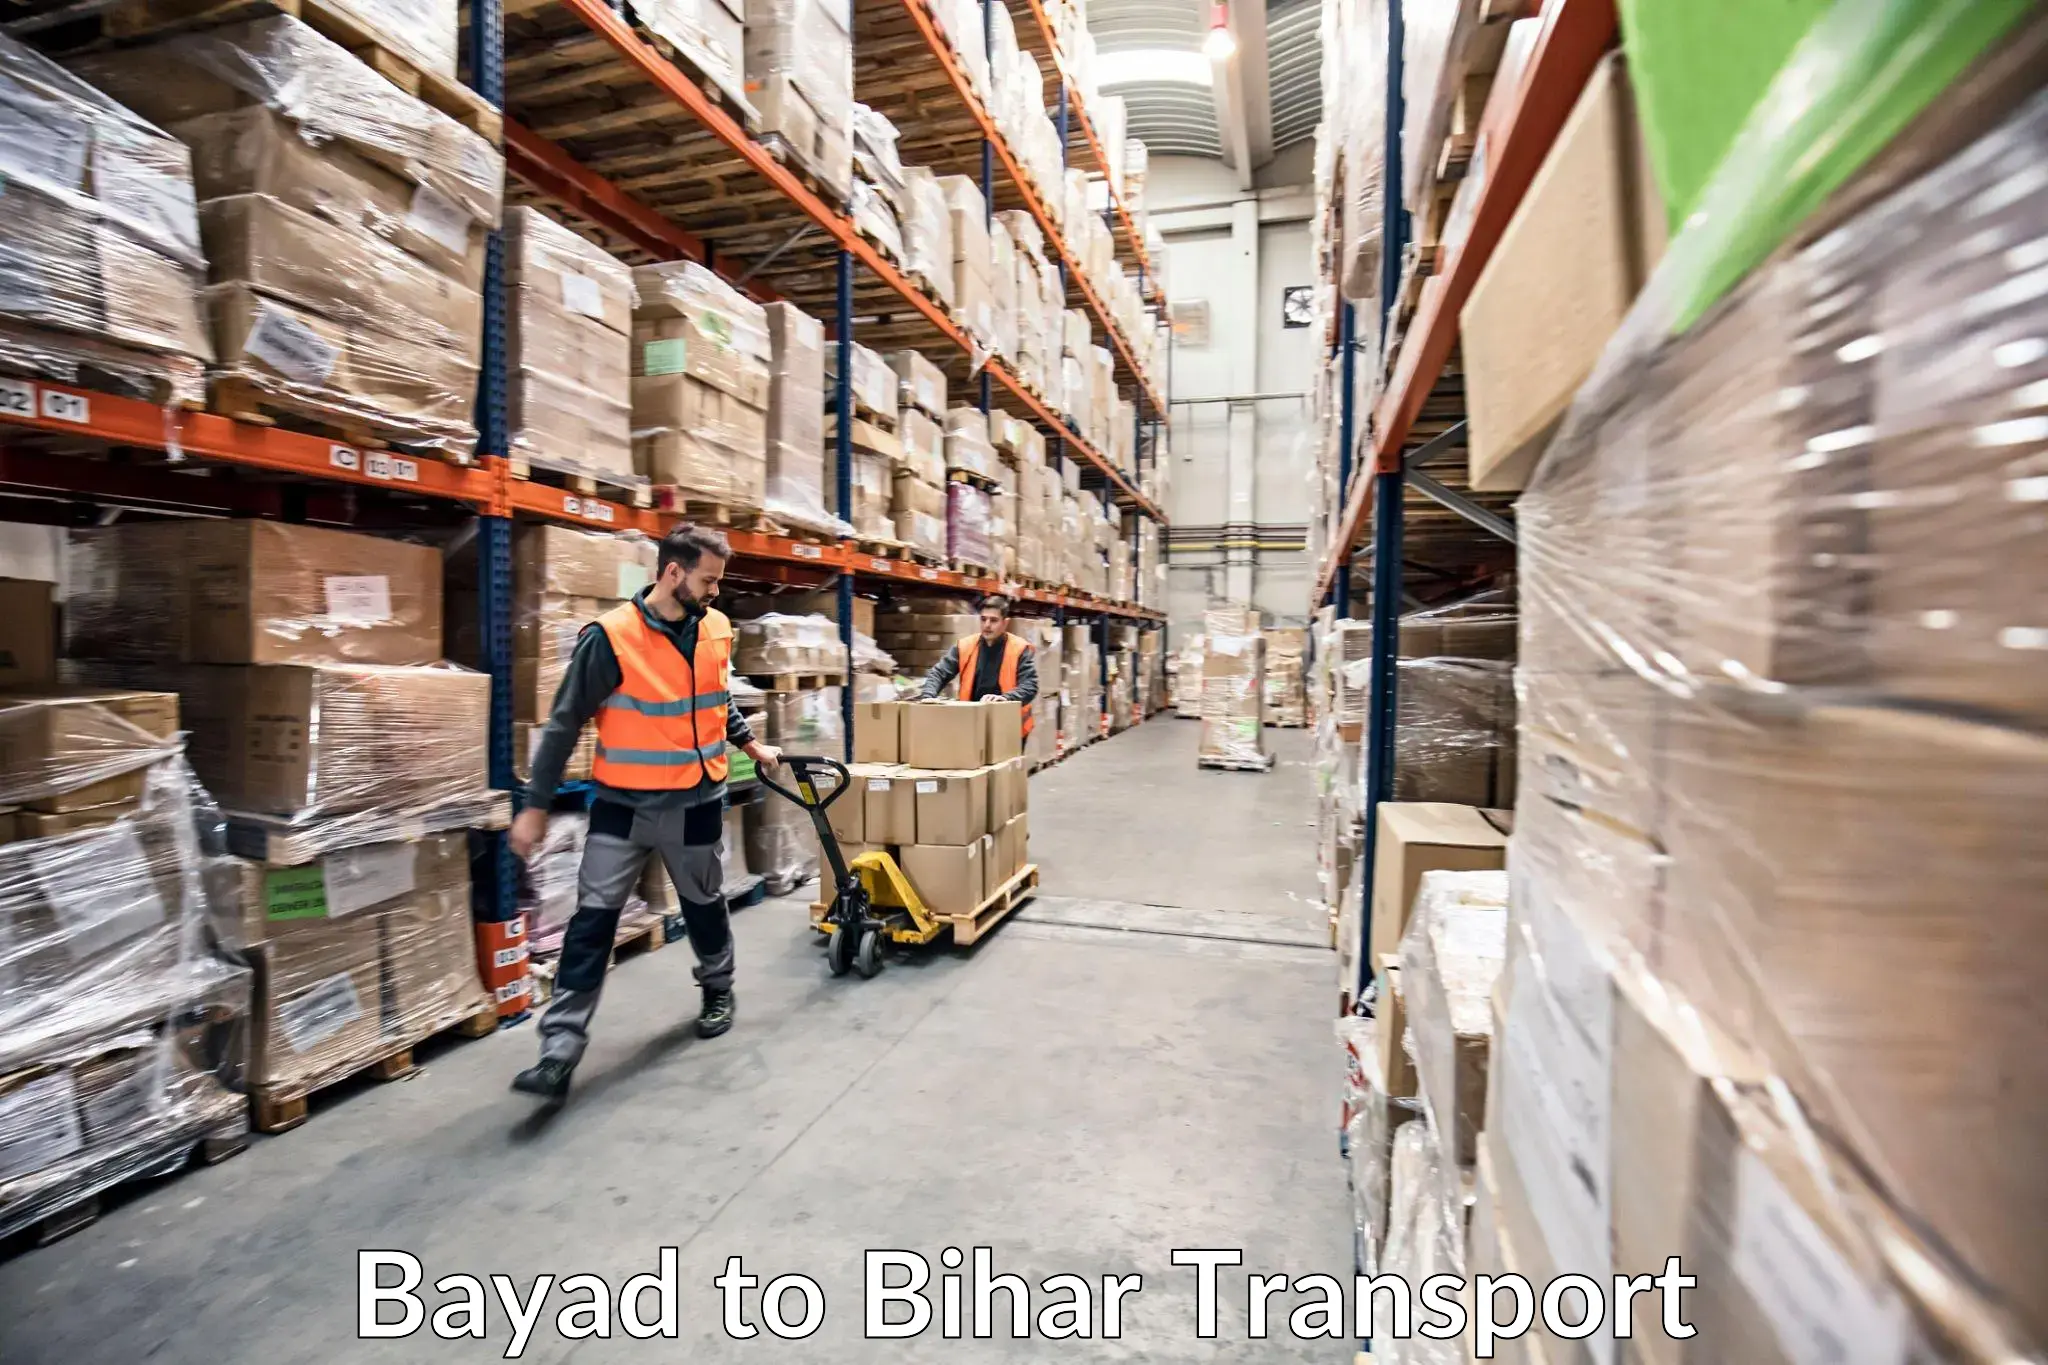 Goods delivery service Bayad to Banka